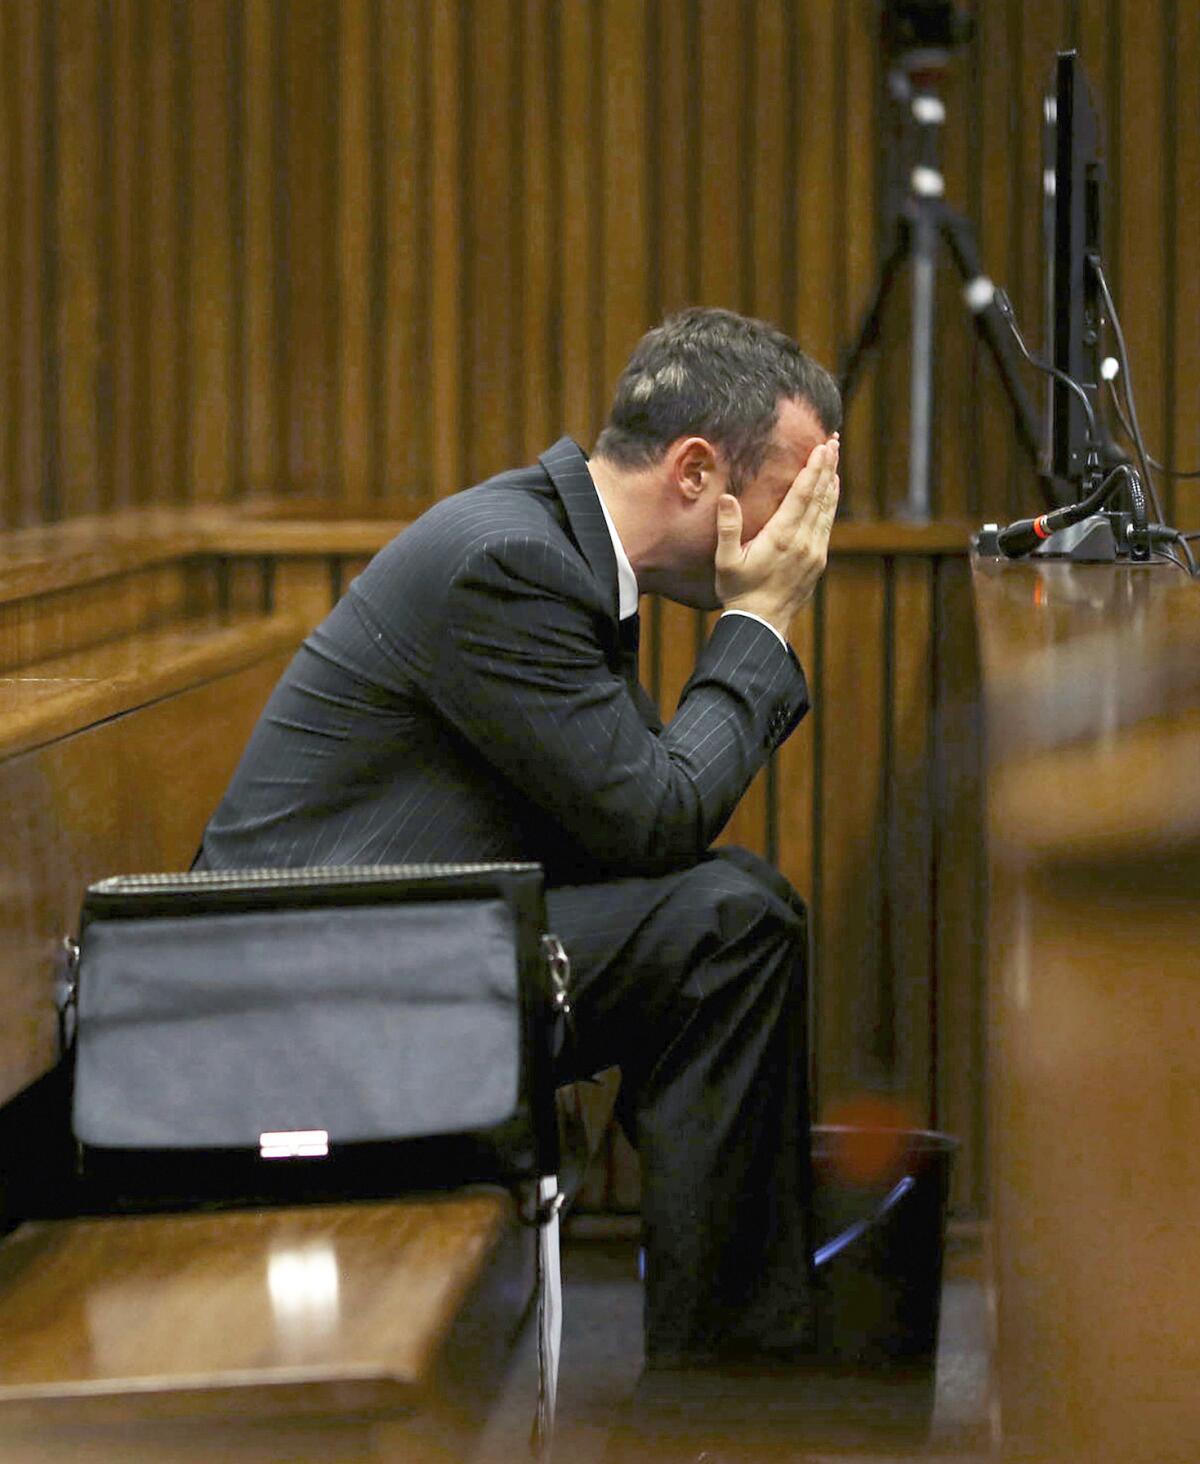 Oscar Pistorius covers his head in a Pretoria court on Monday as he listens to questioning about the events surrounding the shooting death of his girlfriend, Reeva Steenkamp.